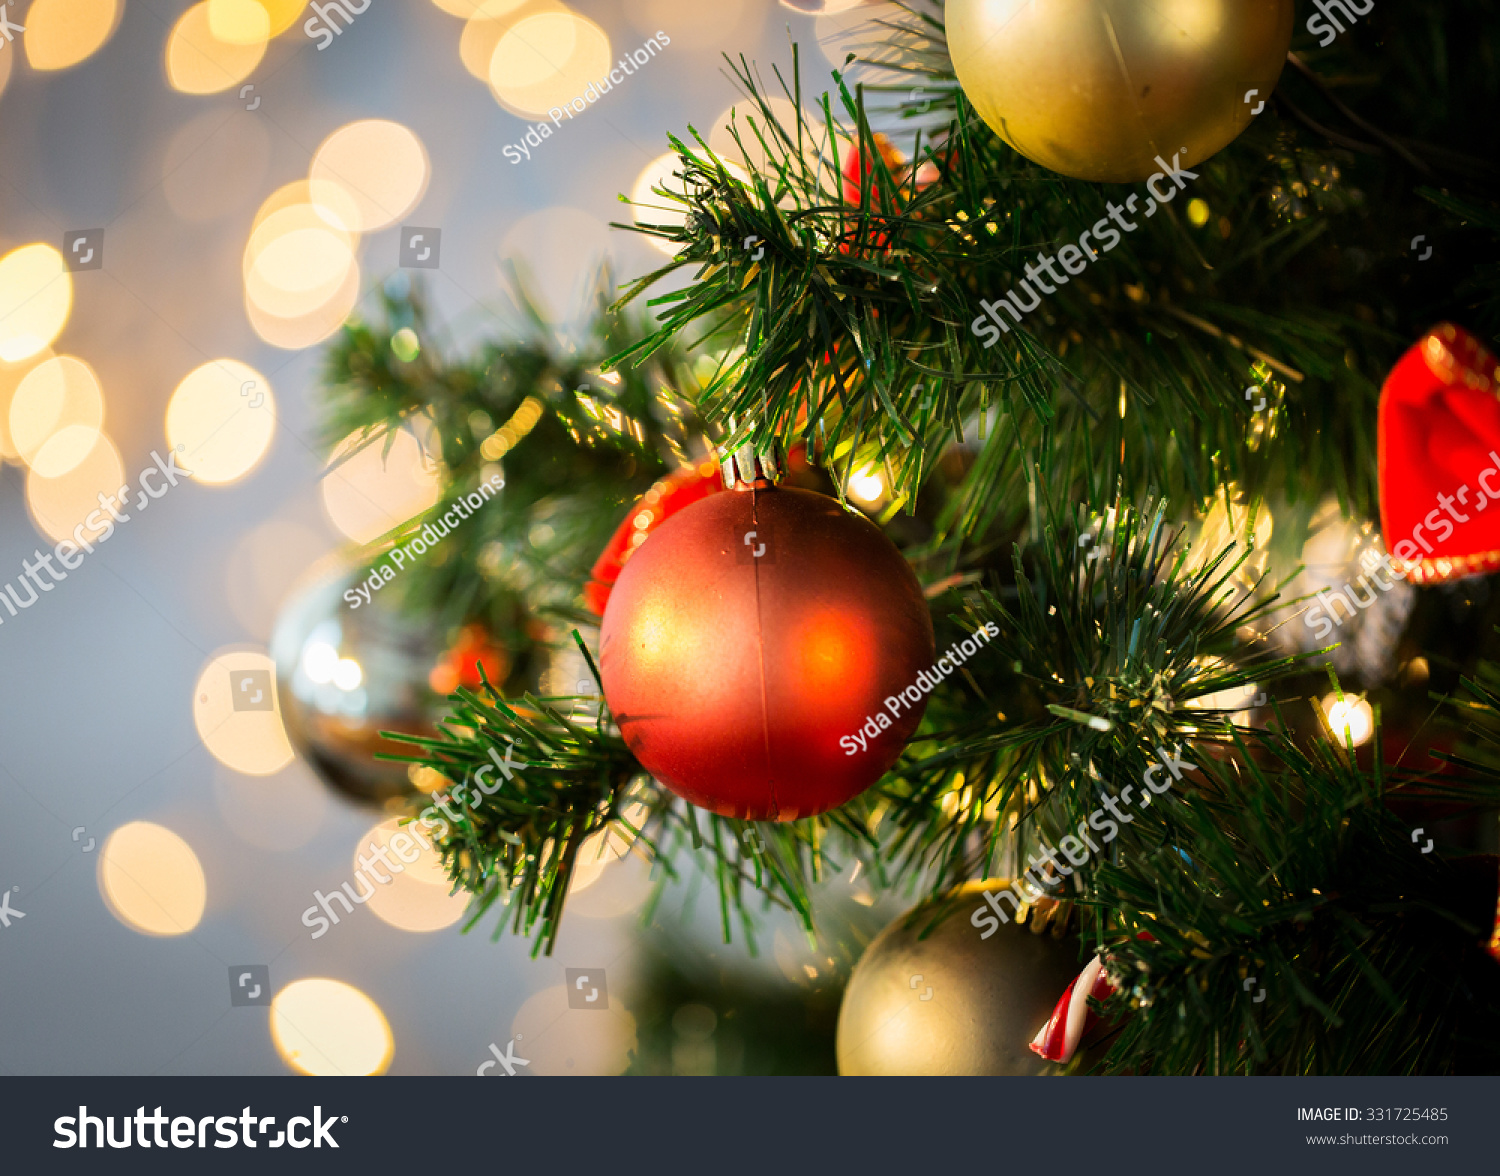 holidays, new year, decor and celebration concept - close up of christmas tree decorated with balls #331725485